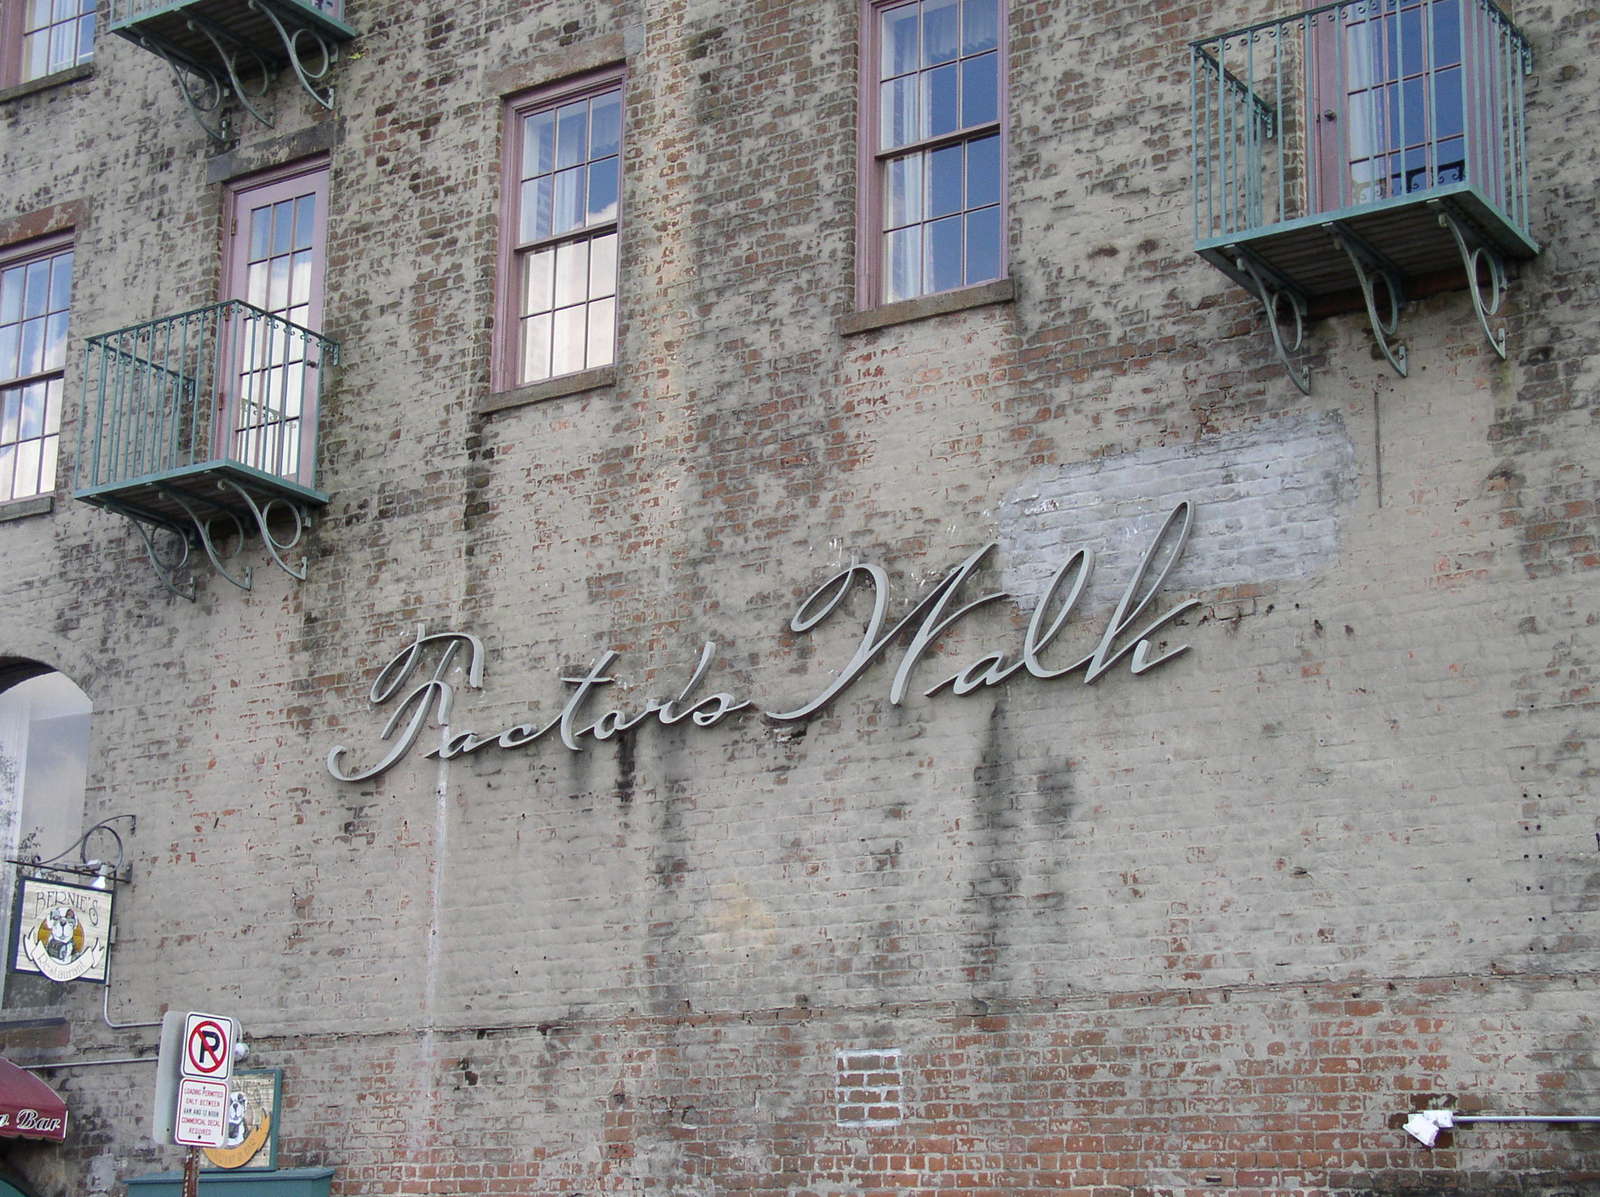 a close up of the outside of a brick building with large windows and an arched sign on the outside of it